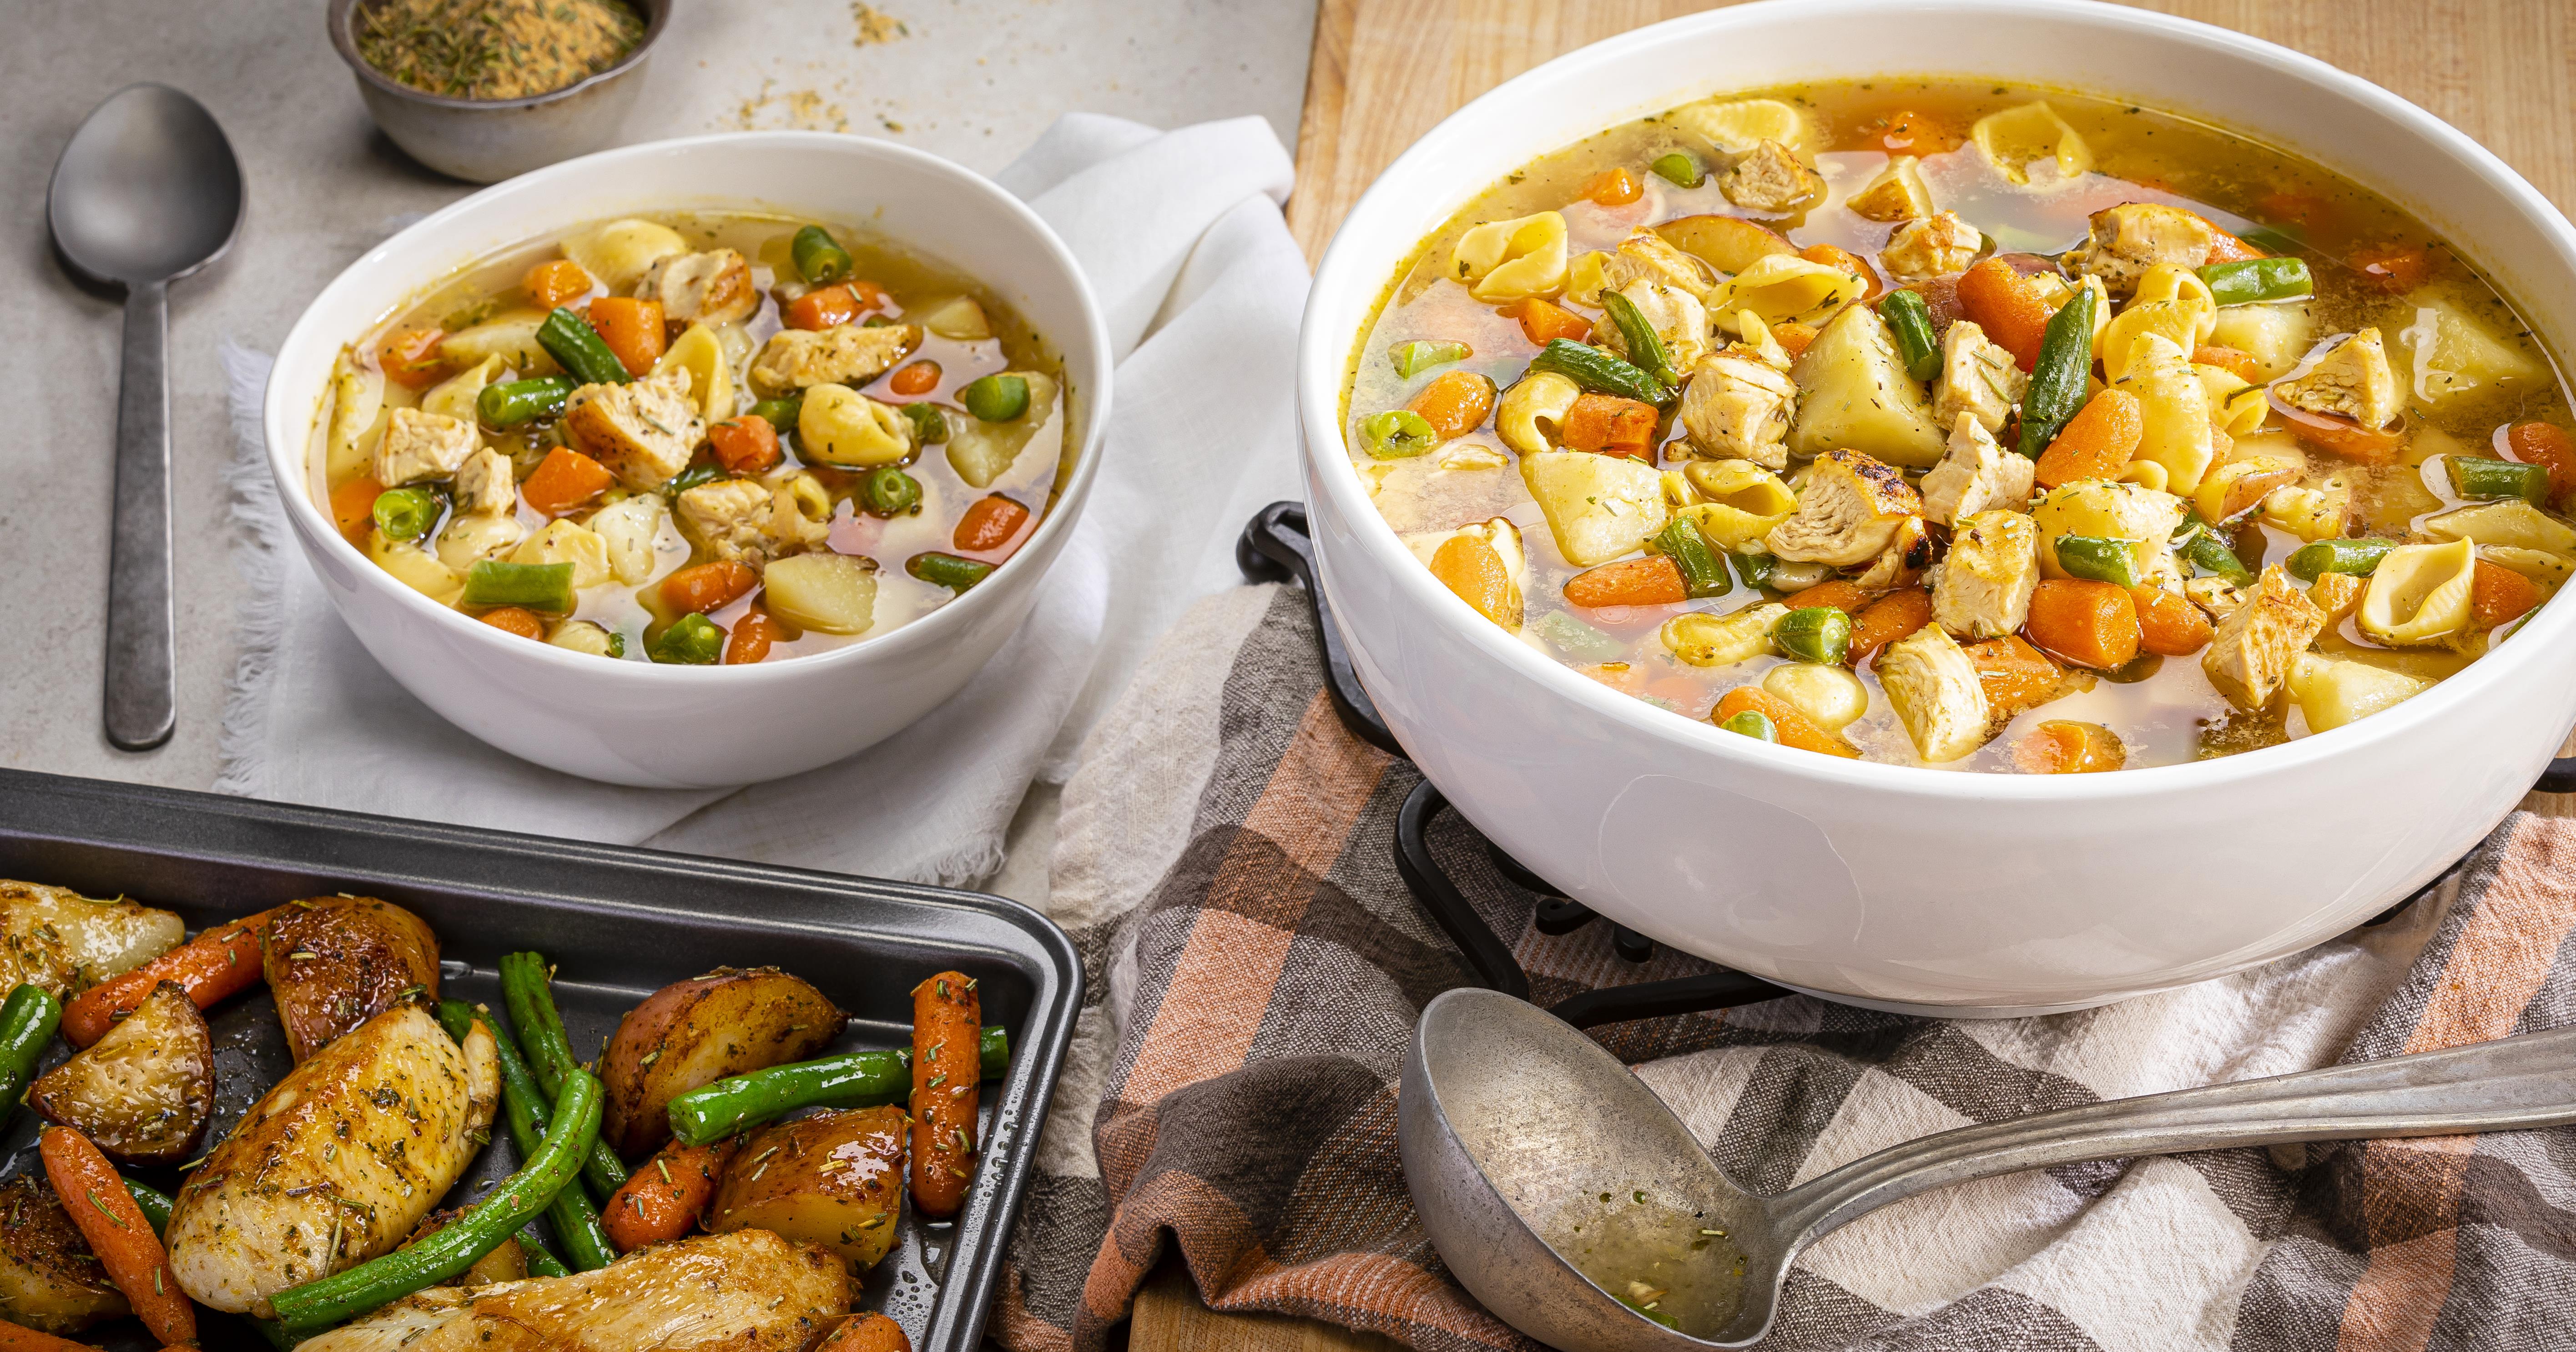 Roasted Chicken and Vegetable Soup